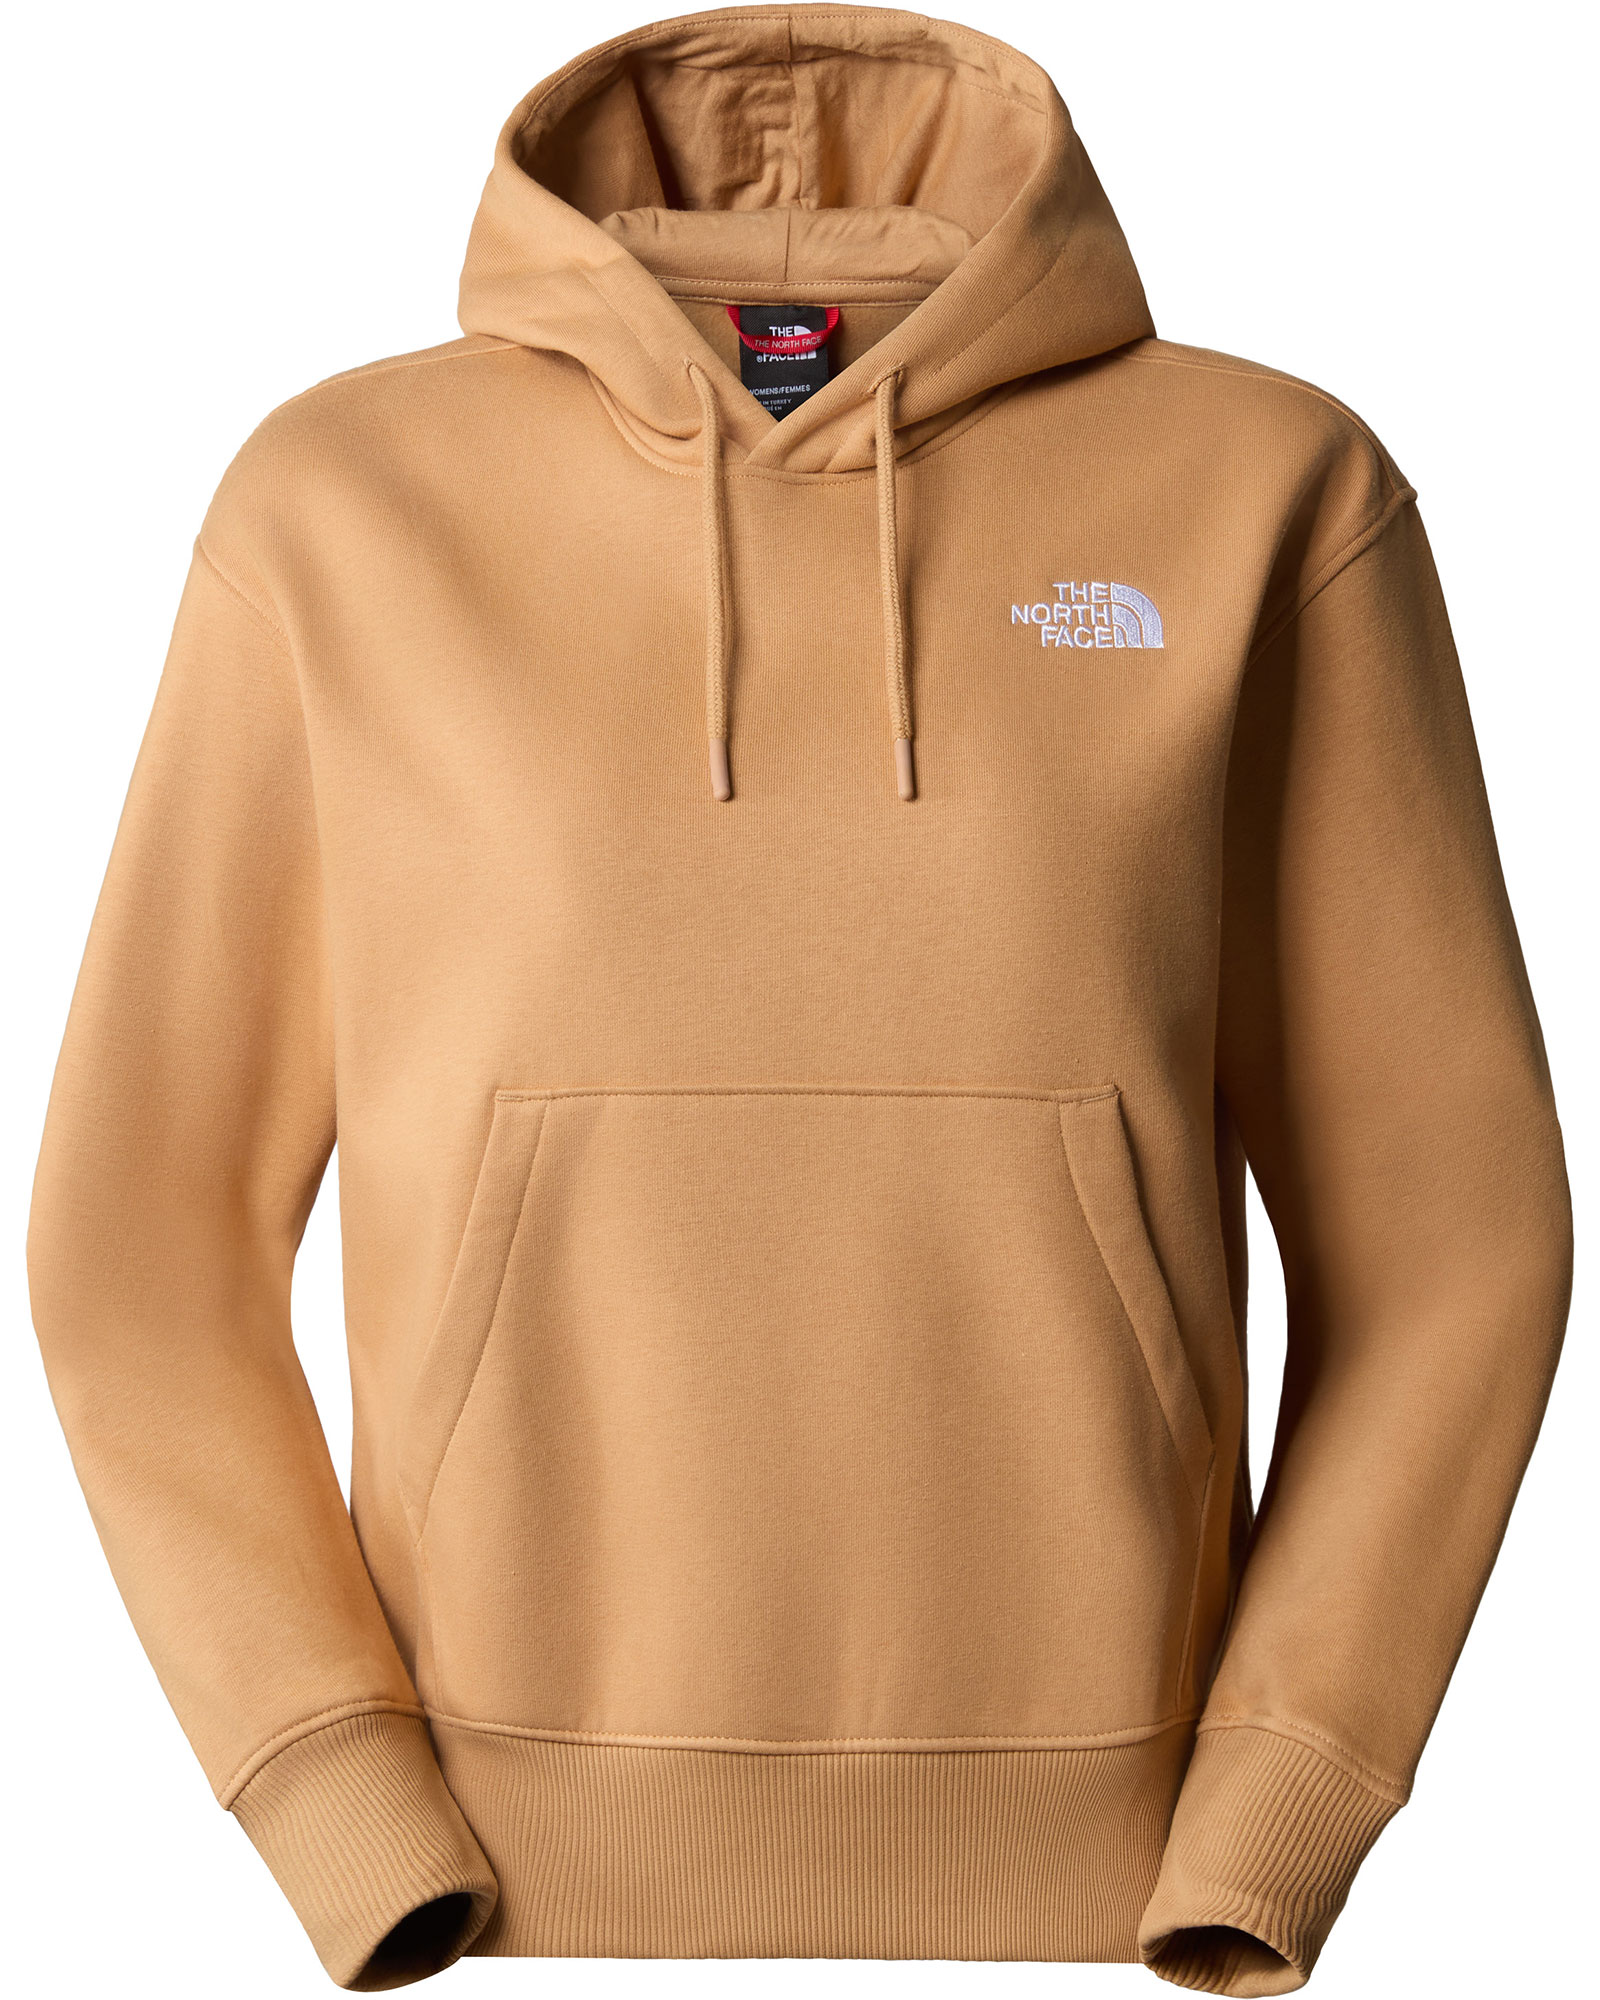 The North Face Women’s Essential Hoodie - Almond Butter XL